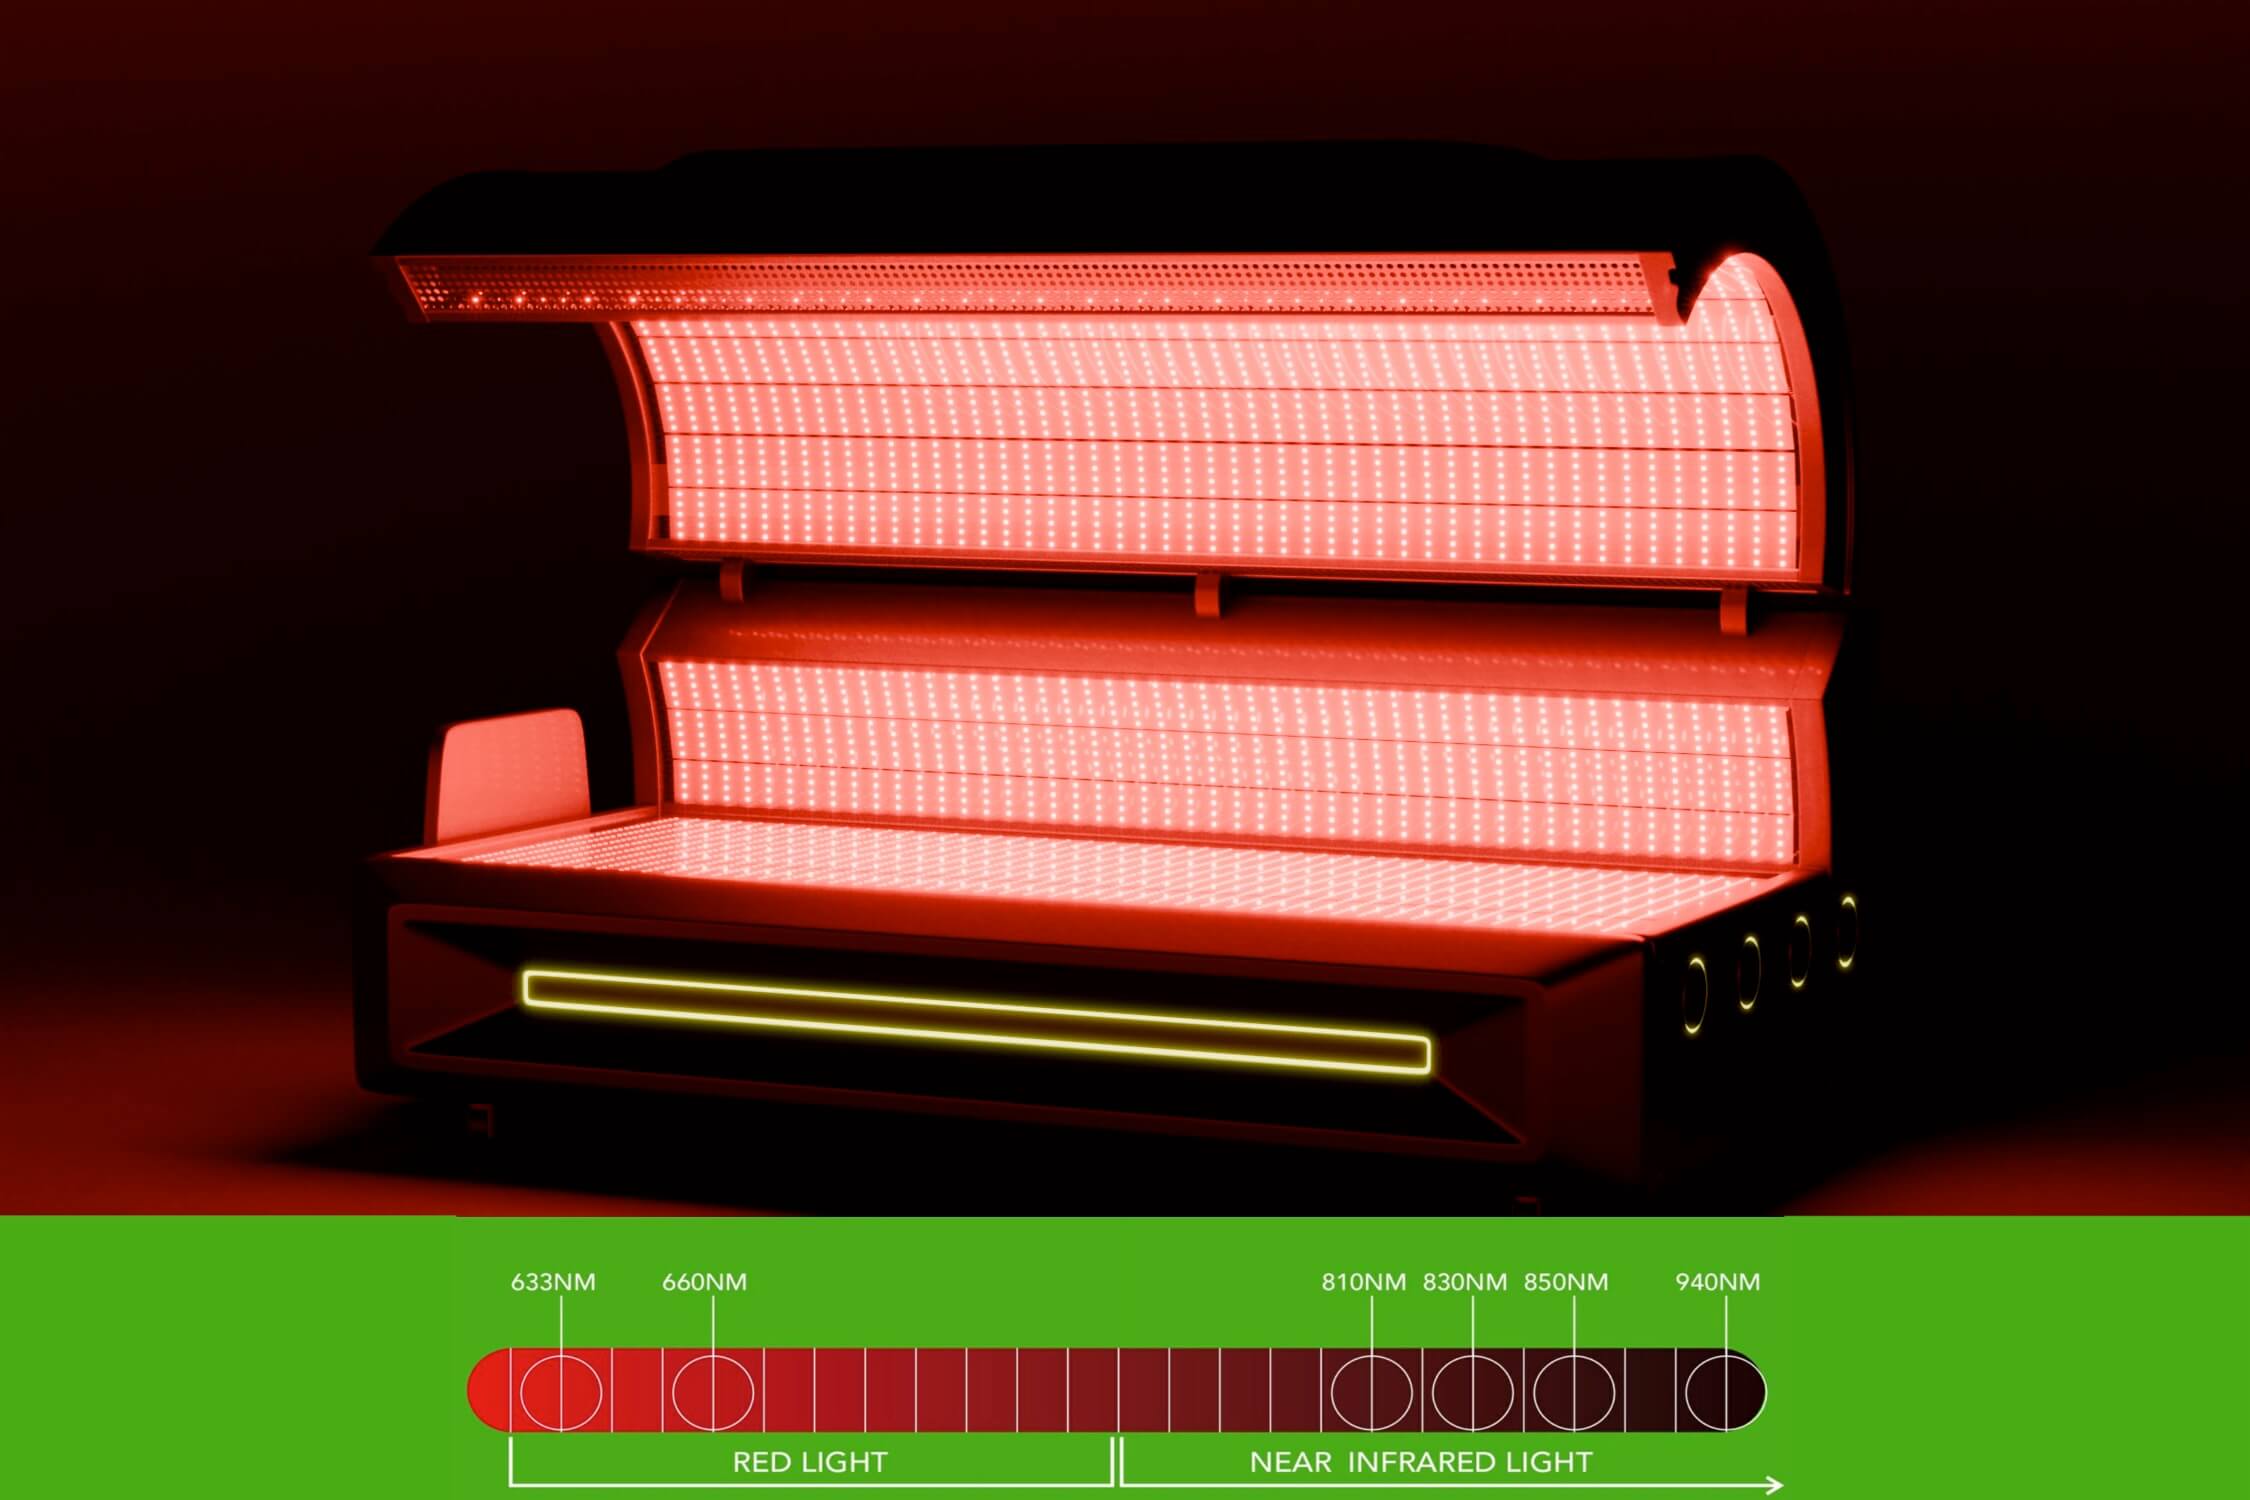 PhotoTech 4k - 633nm red light therapy bed